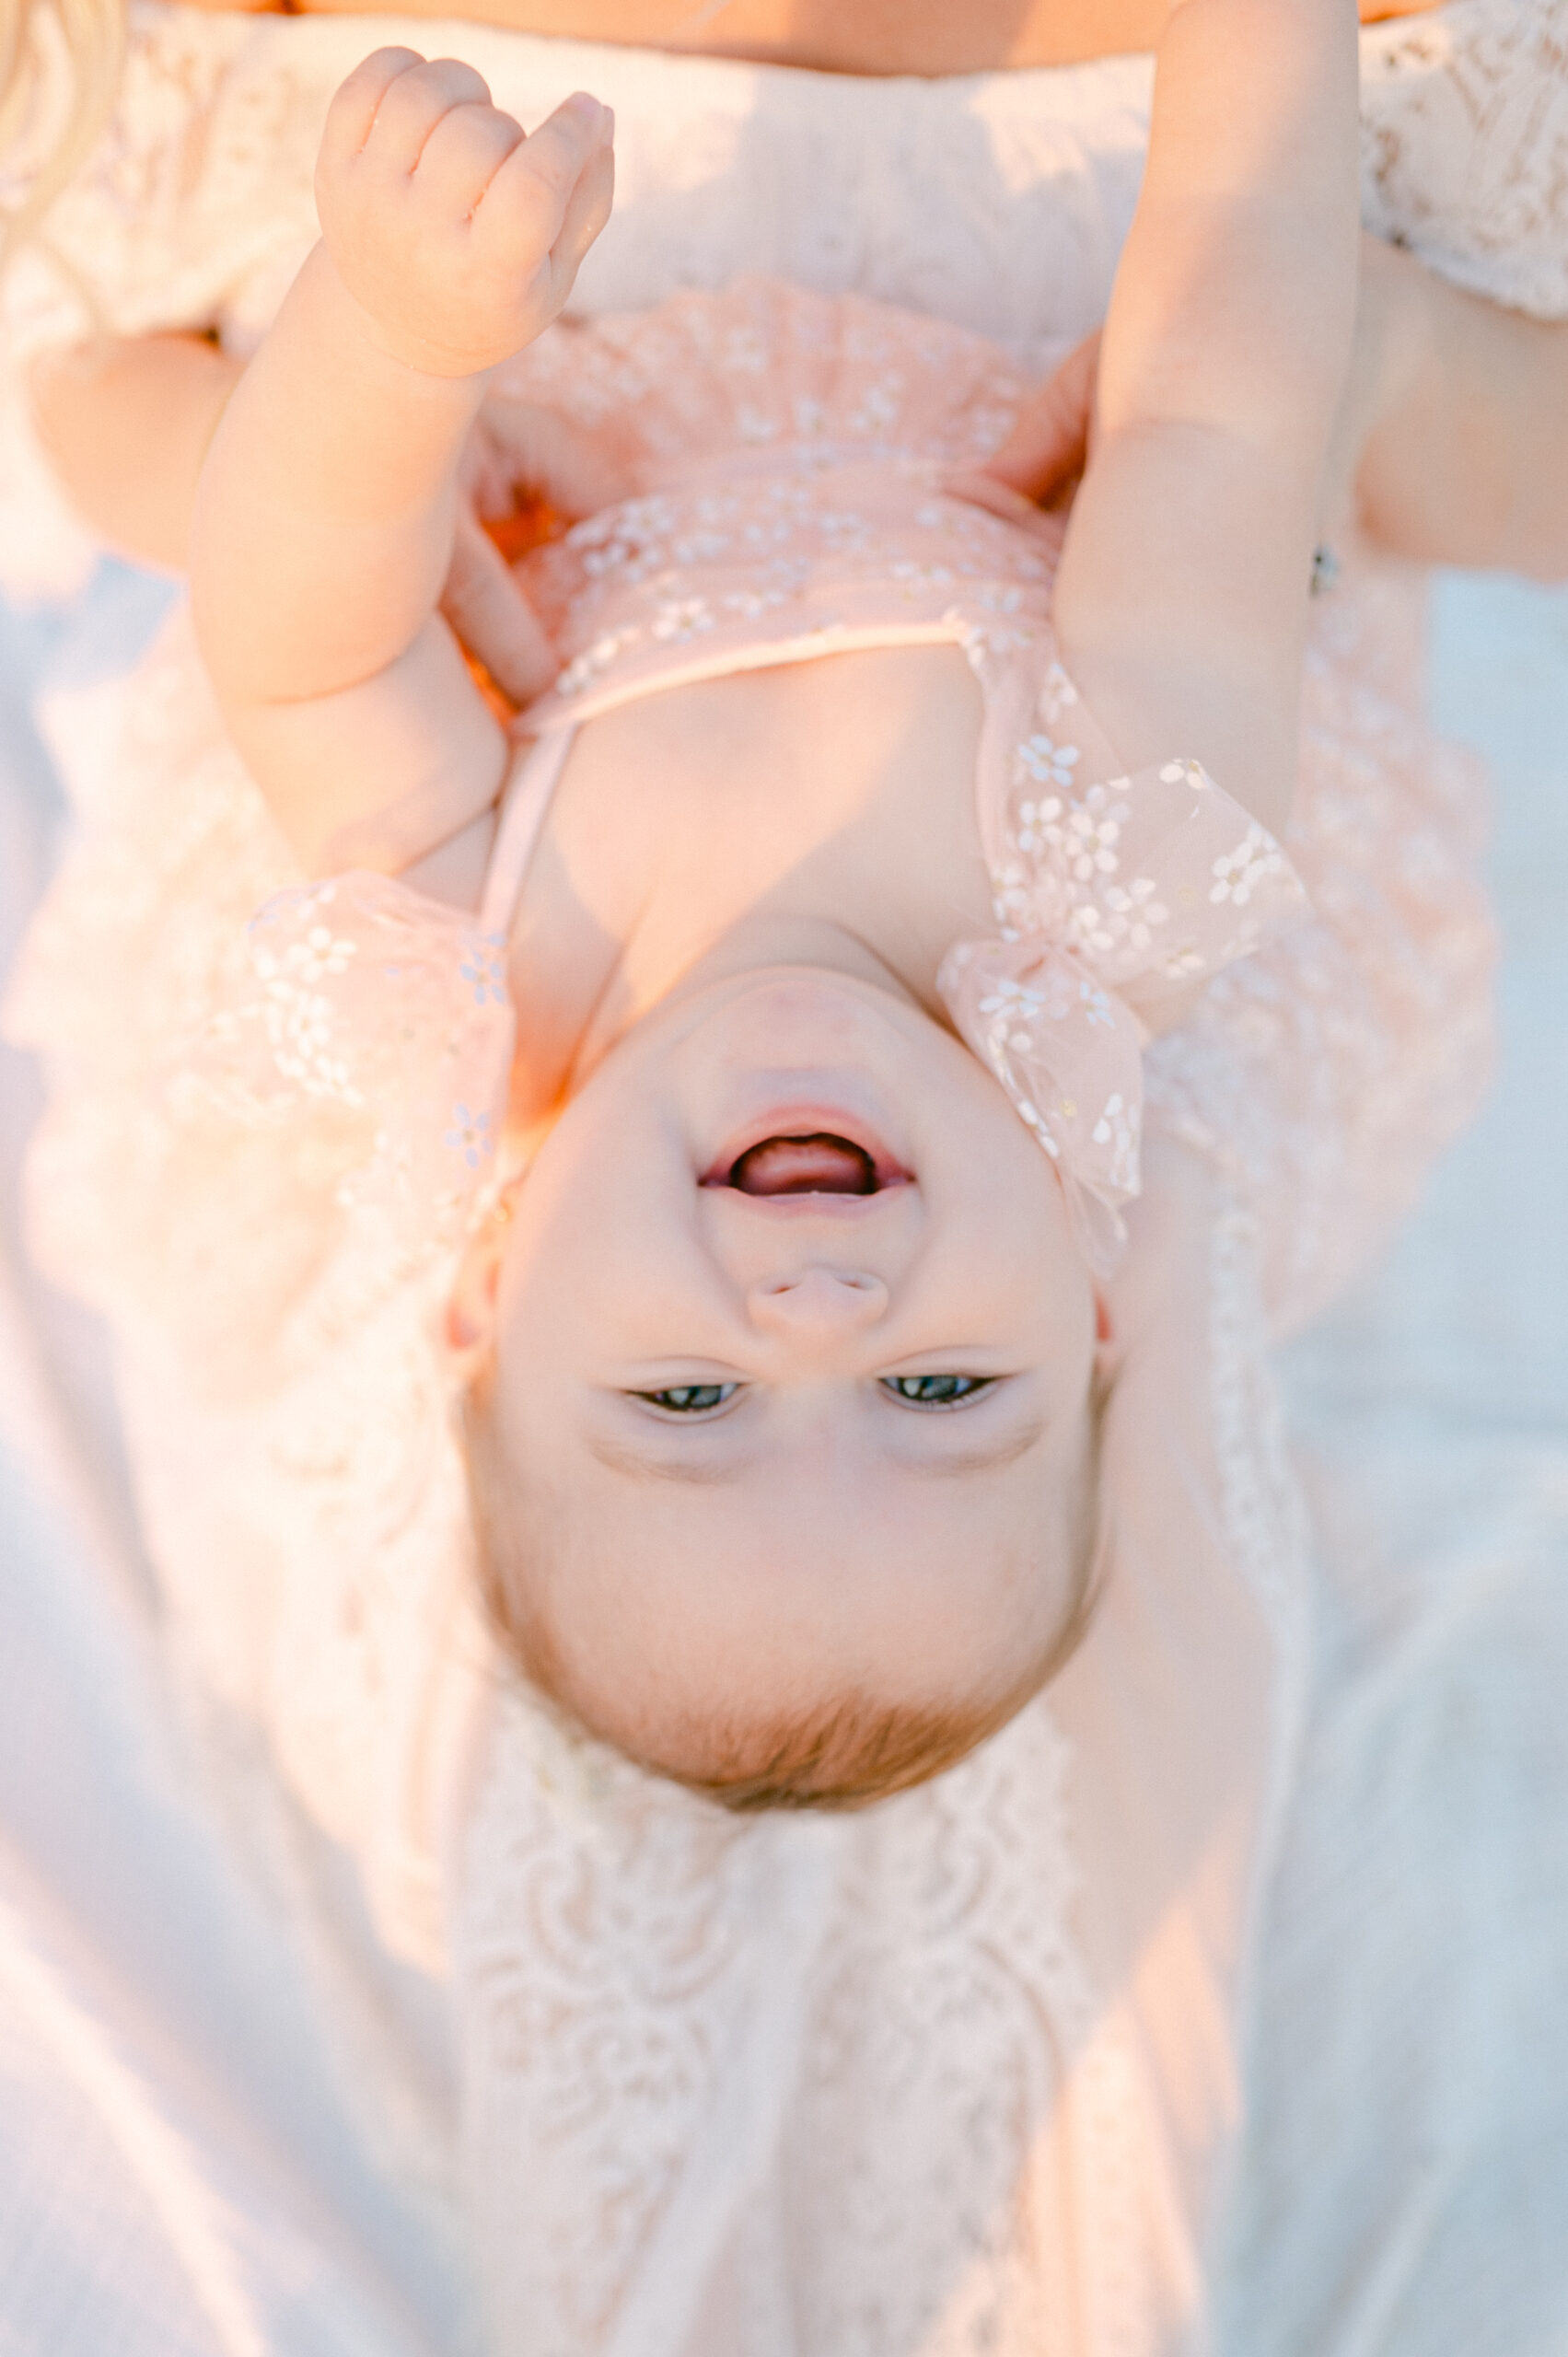 Upside down happy baby by Miami Photographer